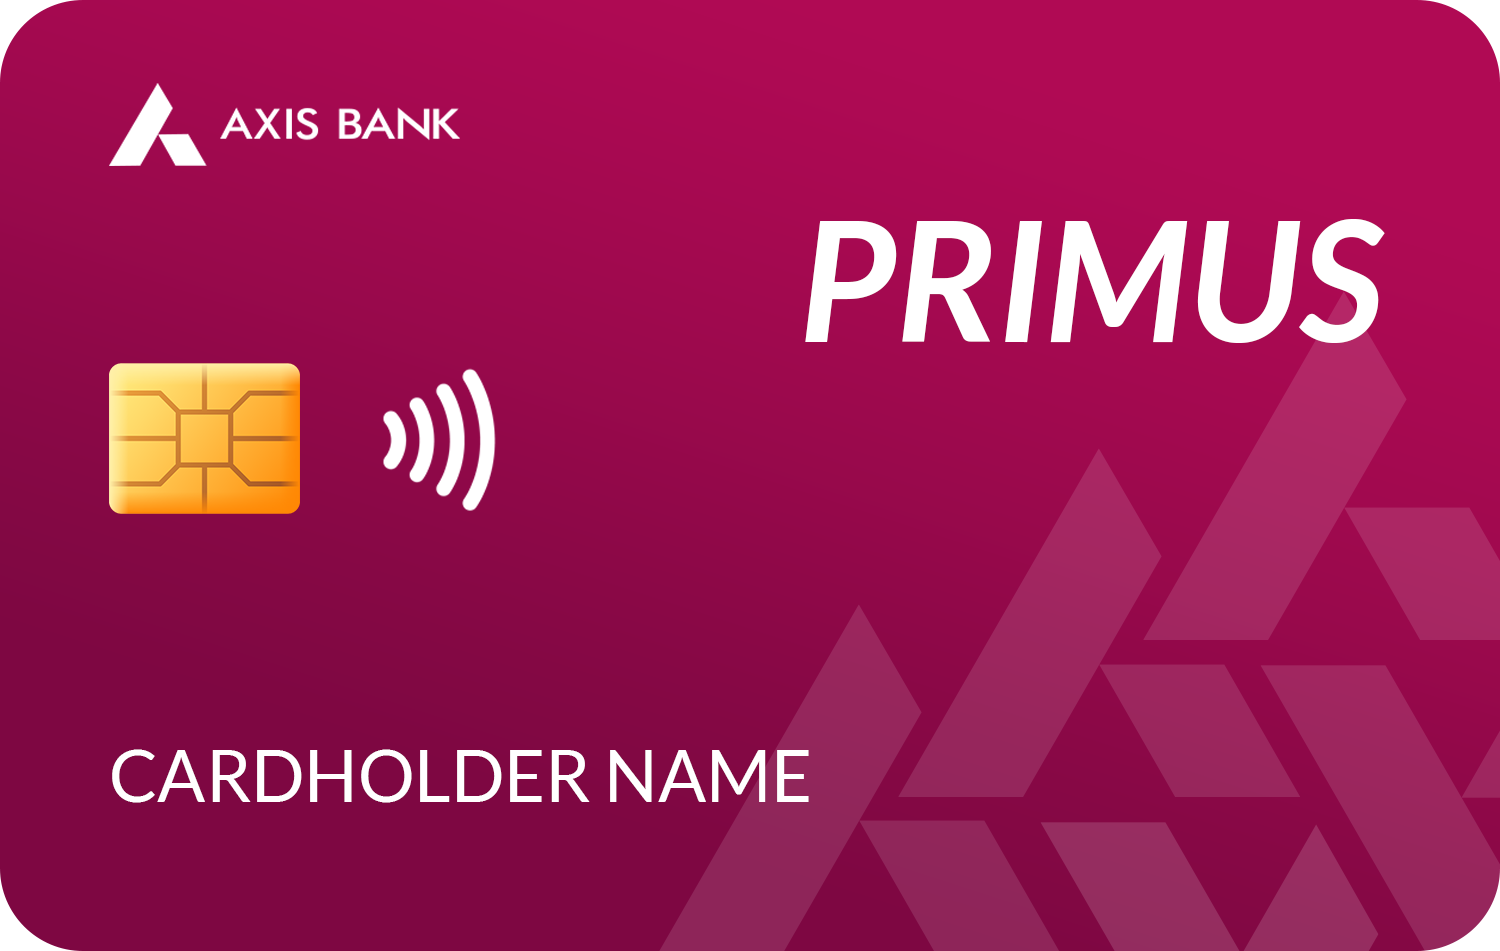 Axis-Primus-Credit-Card